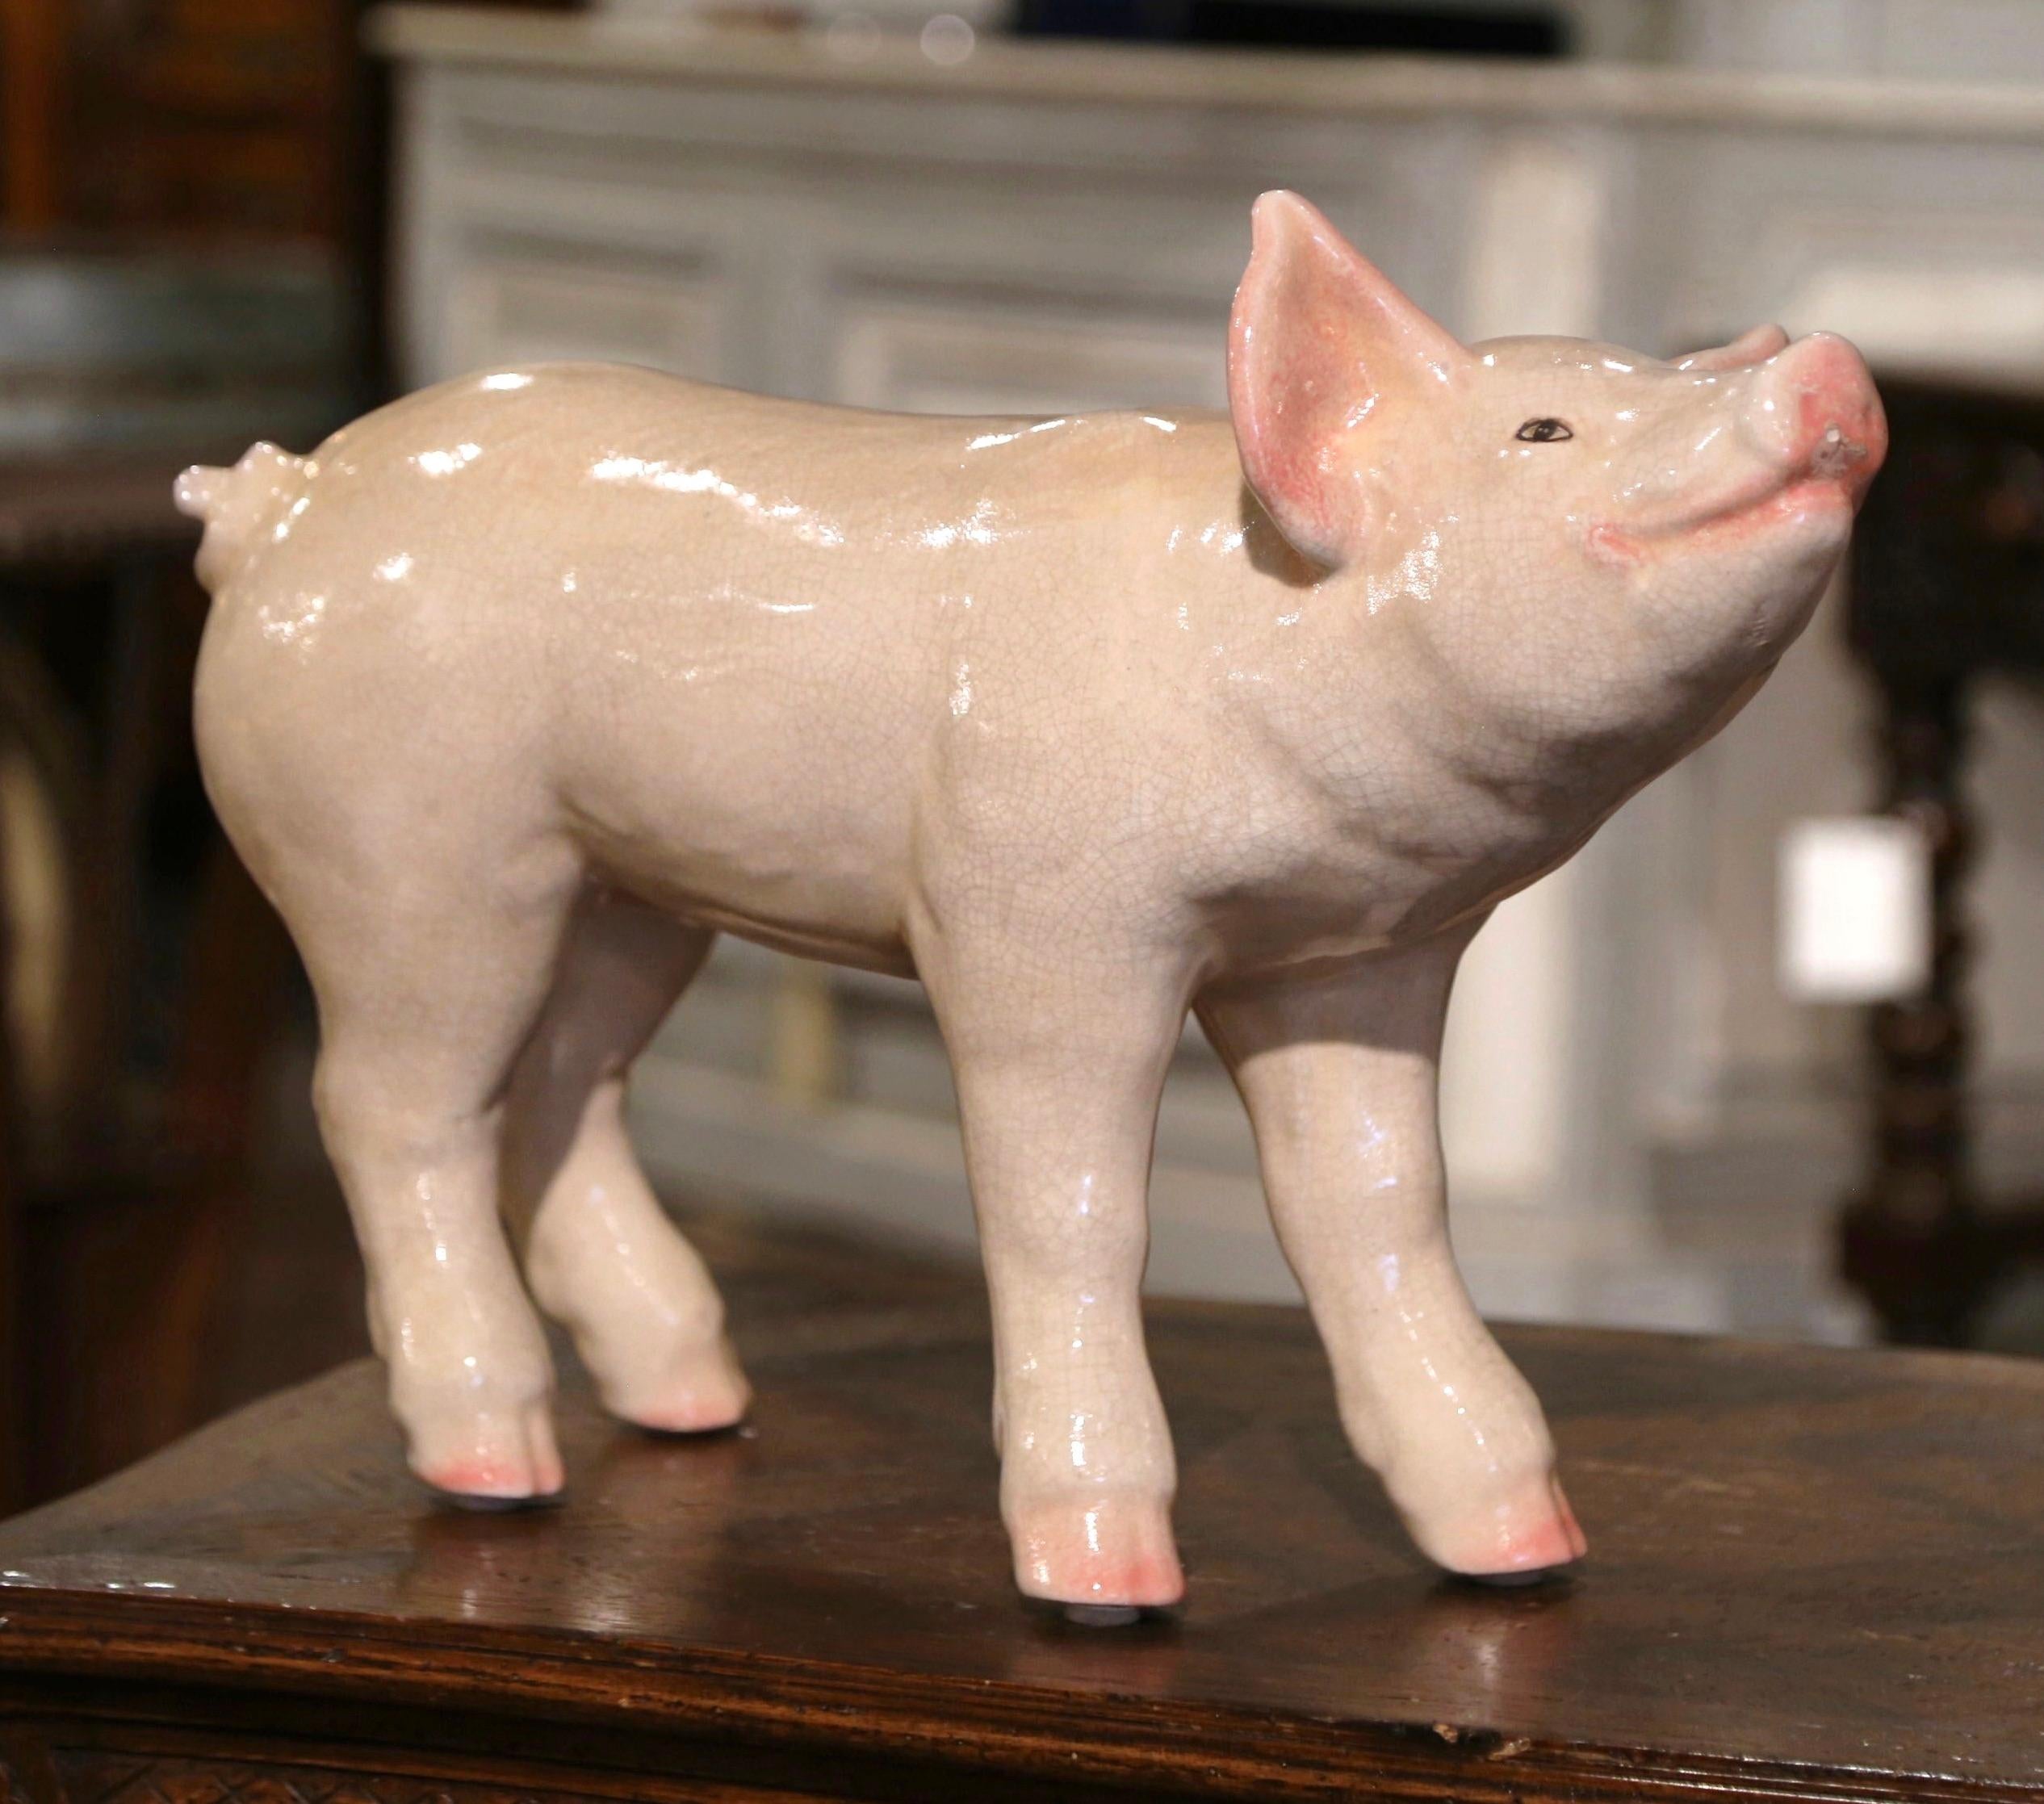 Decorate your kitchen counter with this cheerful sculptured pig. Crafted, circa 1980, the large pig is colorful, expressive, detailed, and realistic in shape and texture. The picturesque ceramic farm animal is in excellent condition and adorns rich